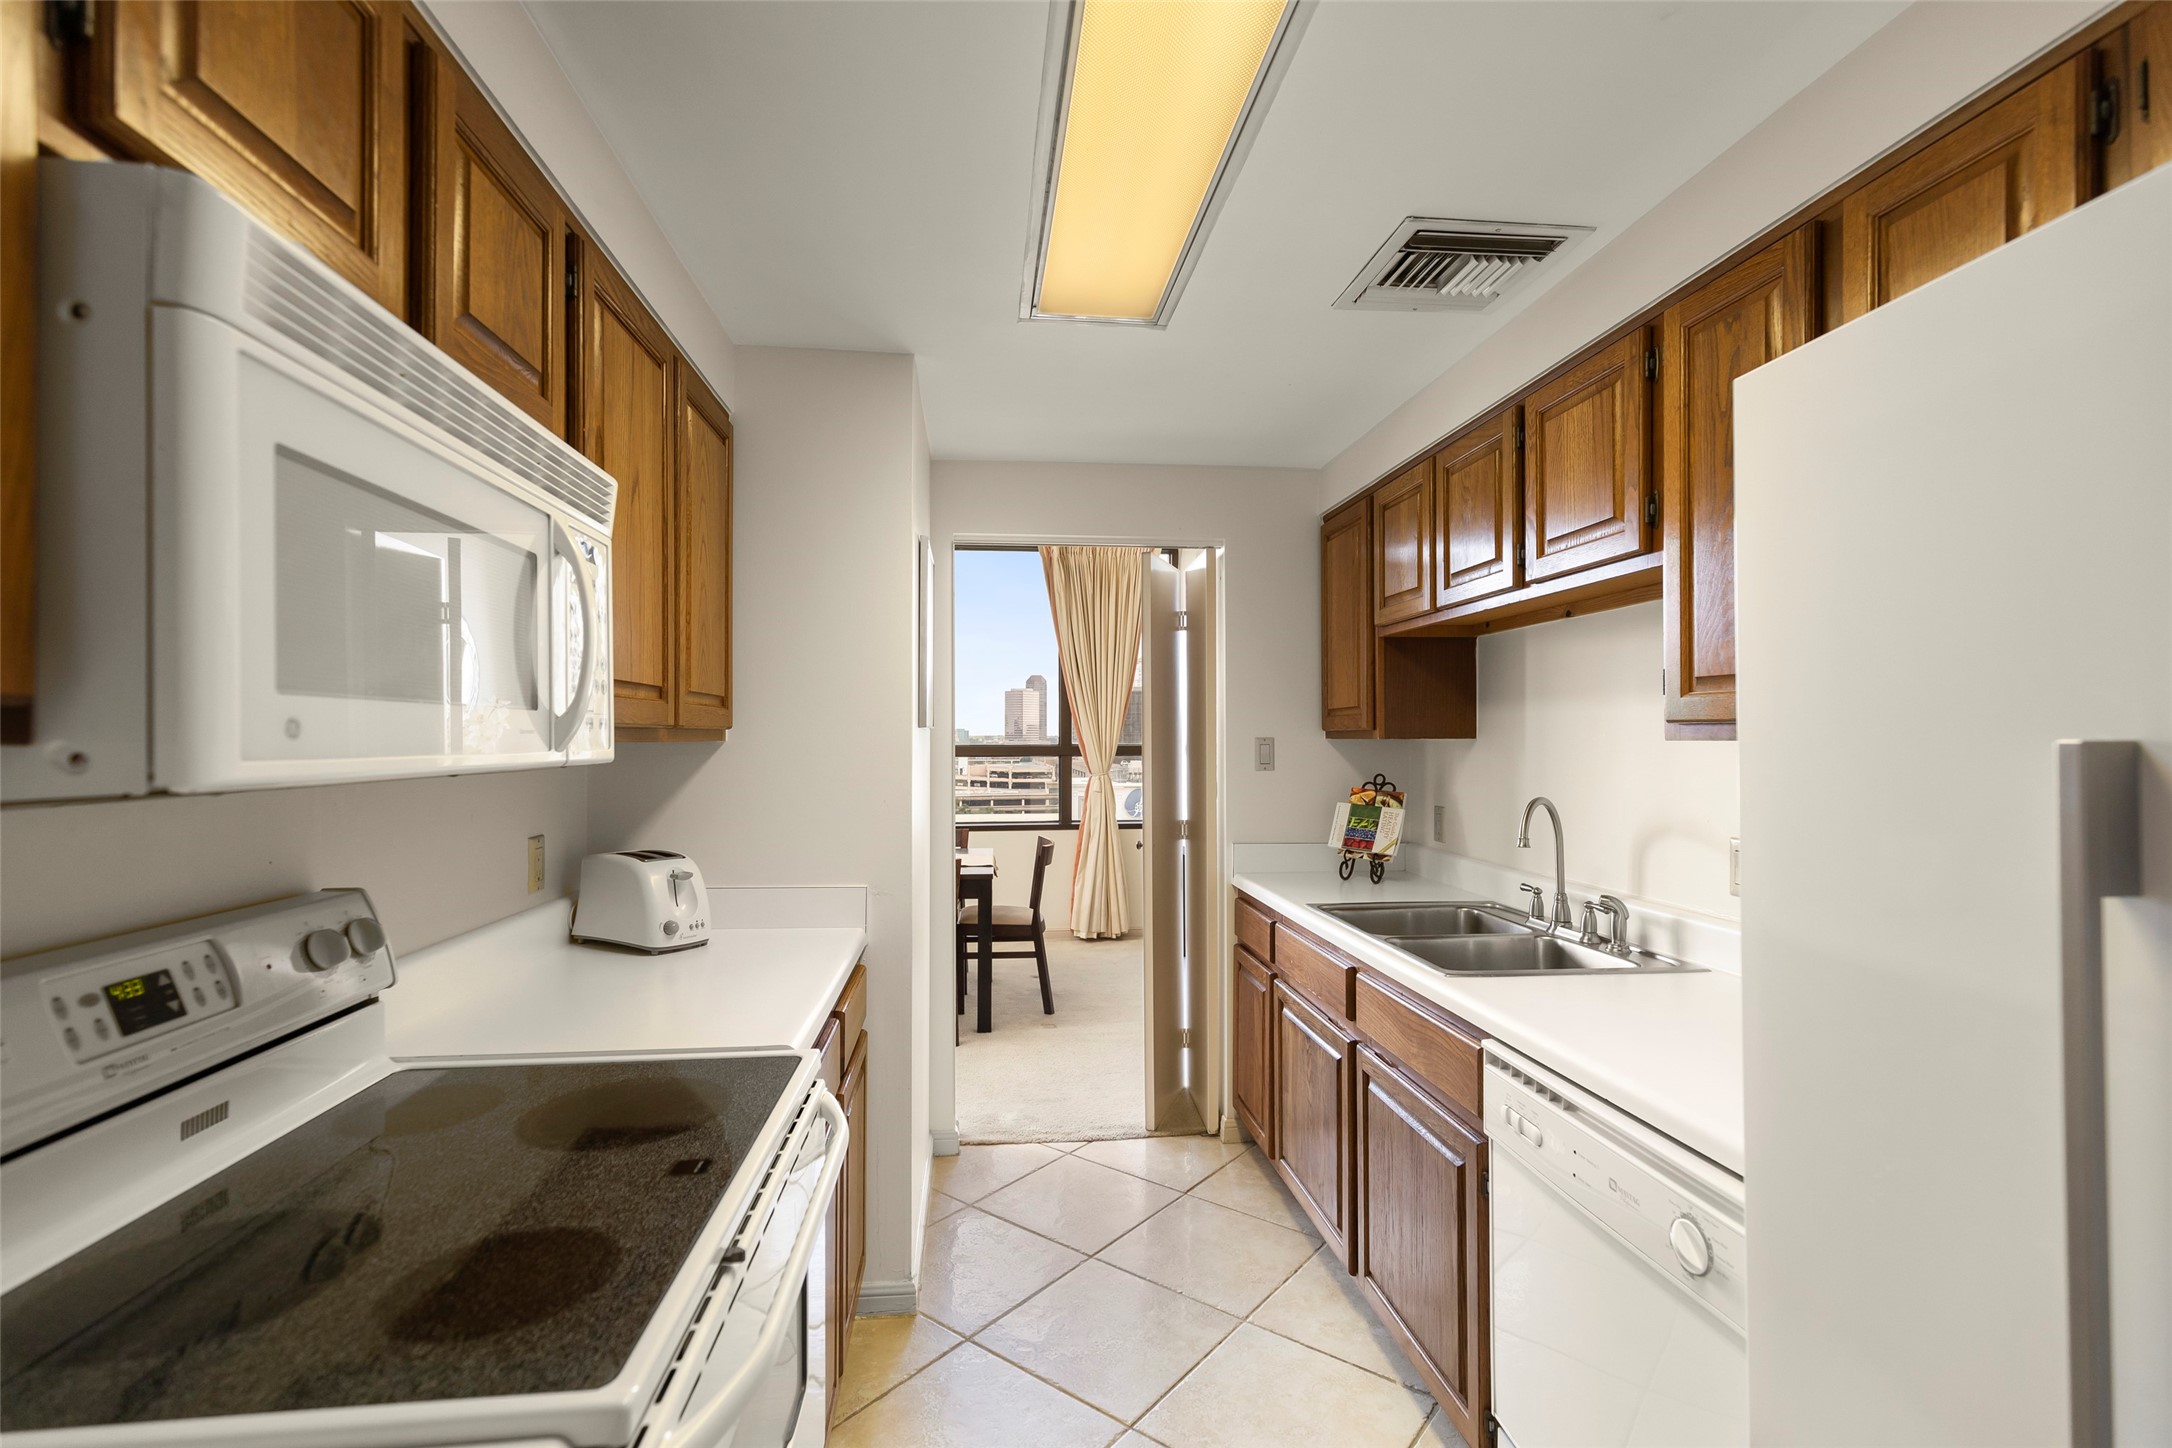 Kitchen with all appliances